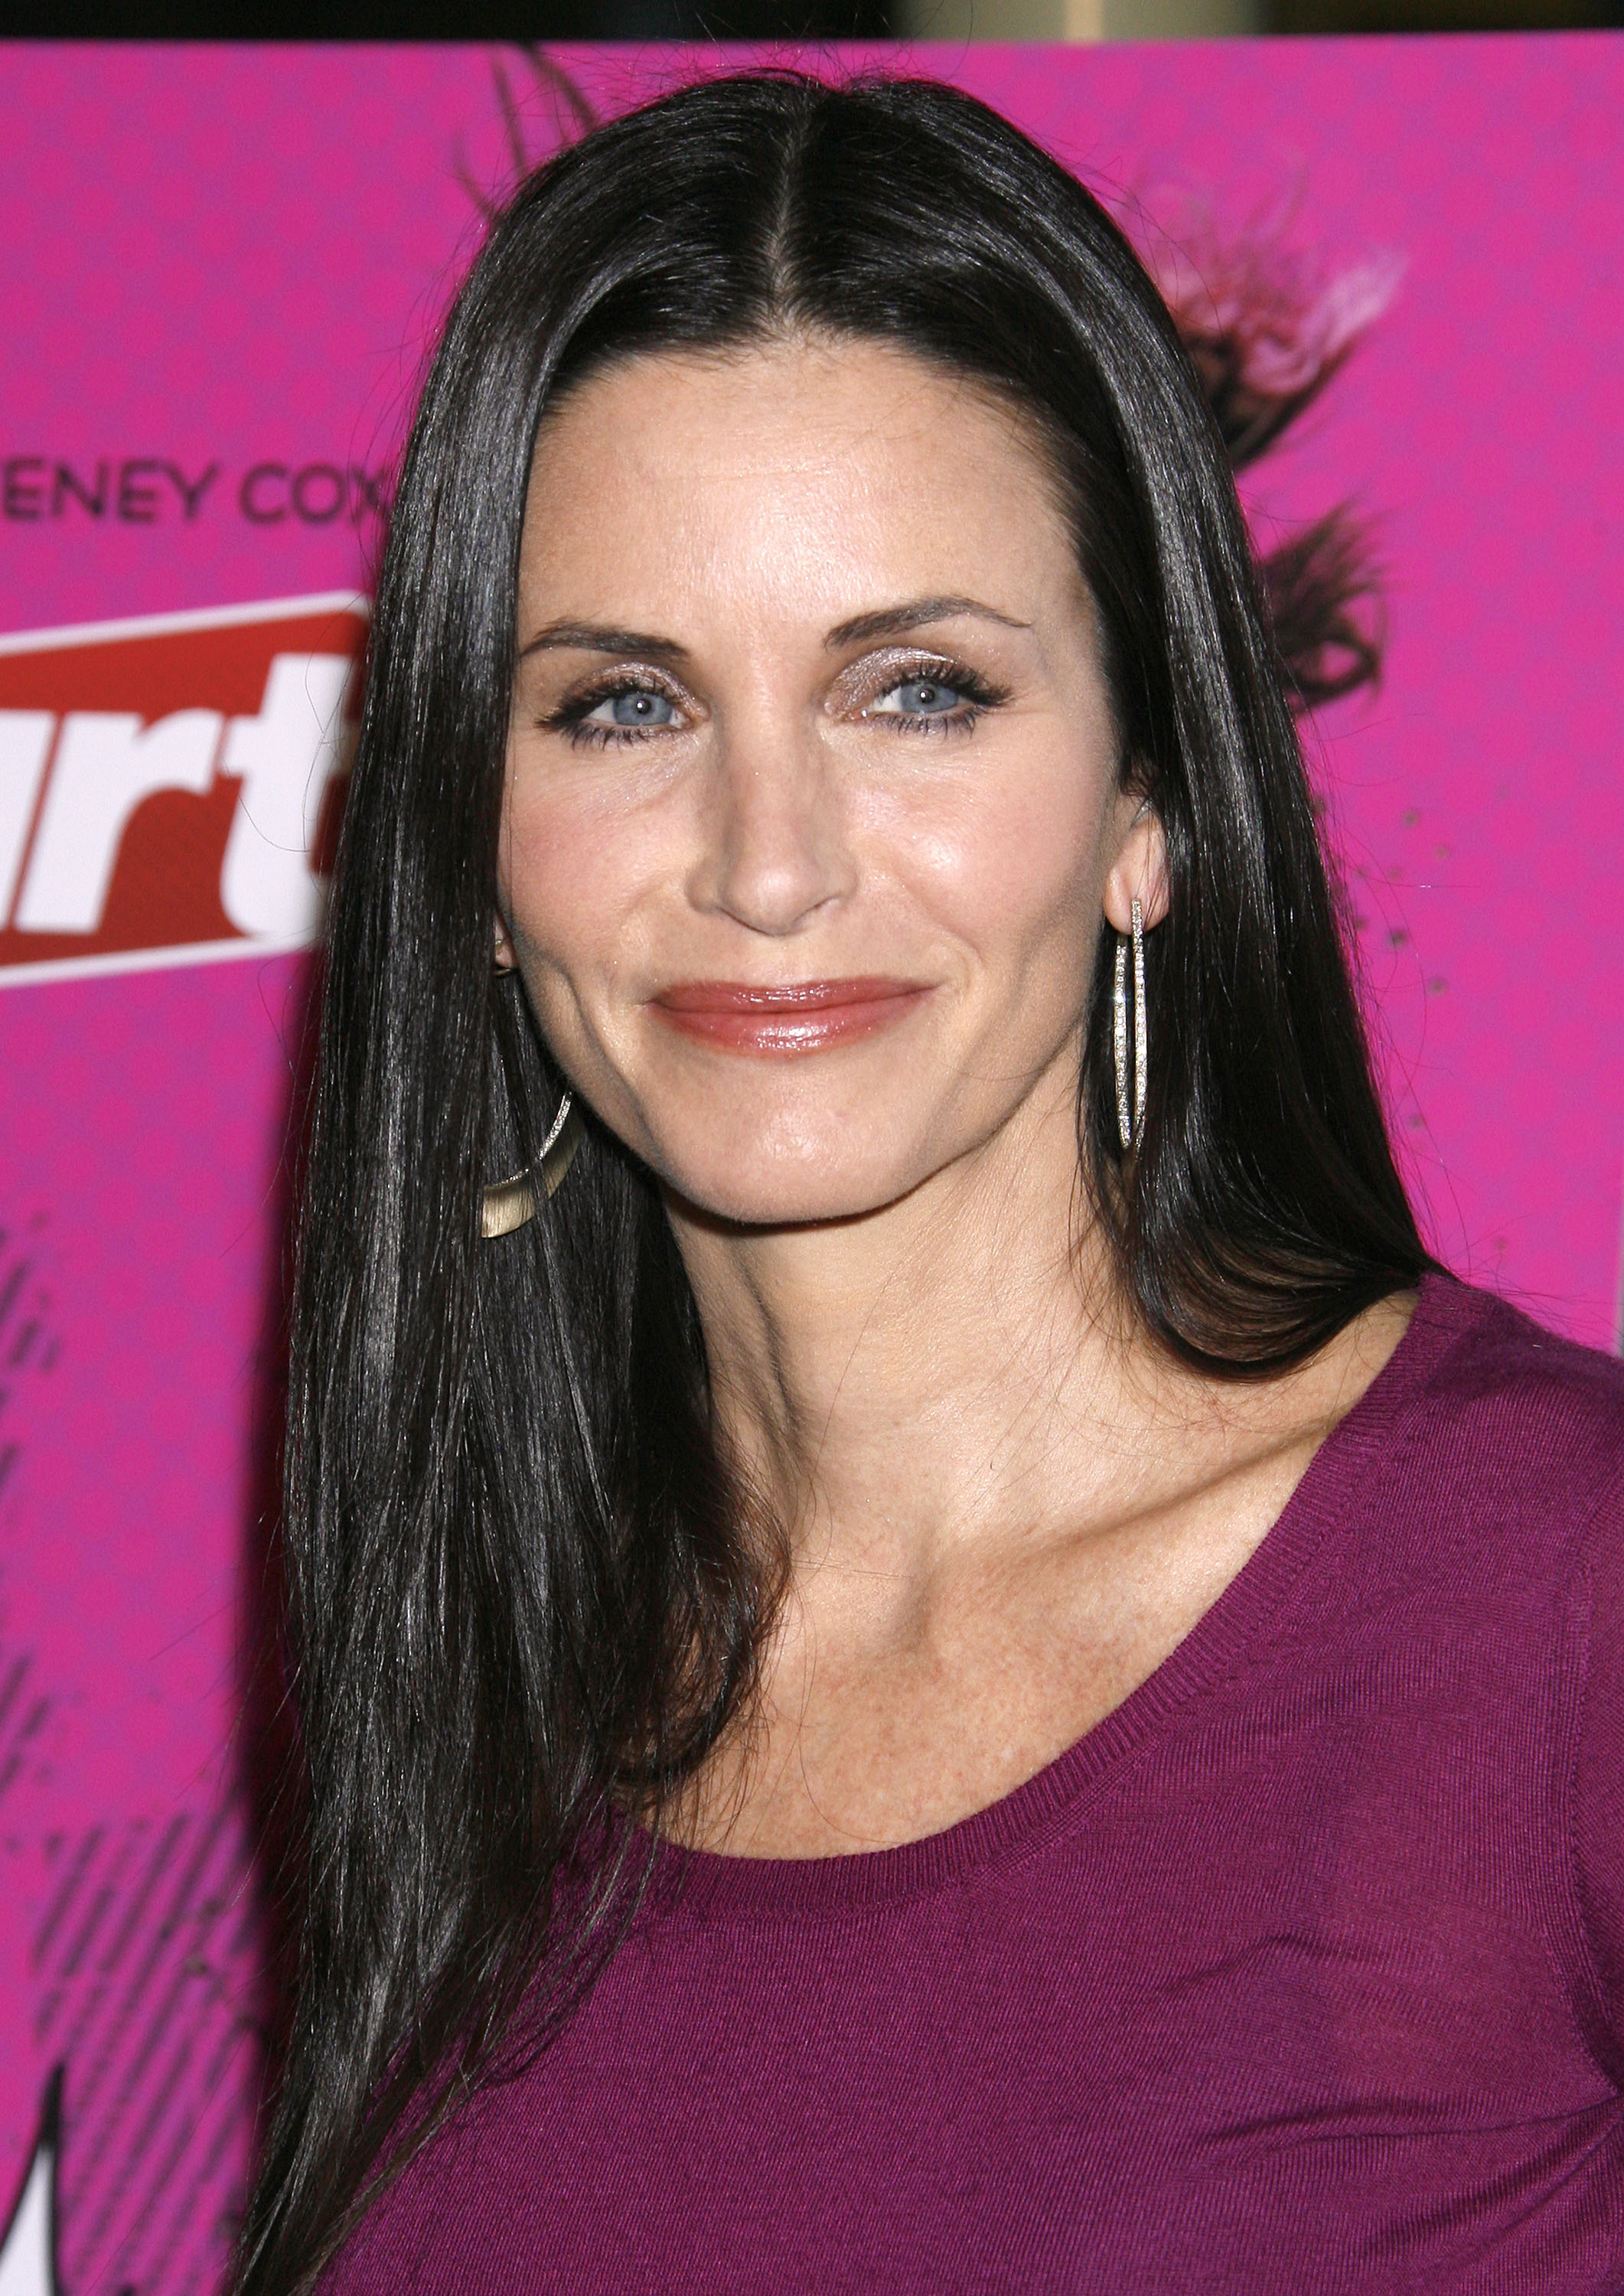 Courteney Cox arrives at the 2nd season premiere screening of FX Network's "Dirt" held at the Arclight Theaters in Hollywood, California on February 28, 2008. | Source: Getty Images